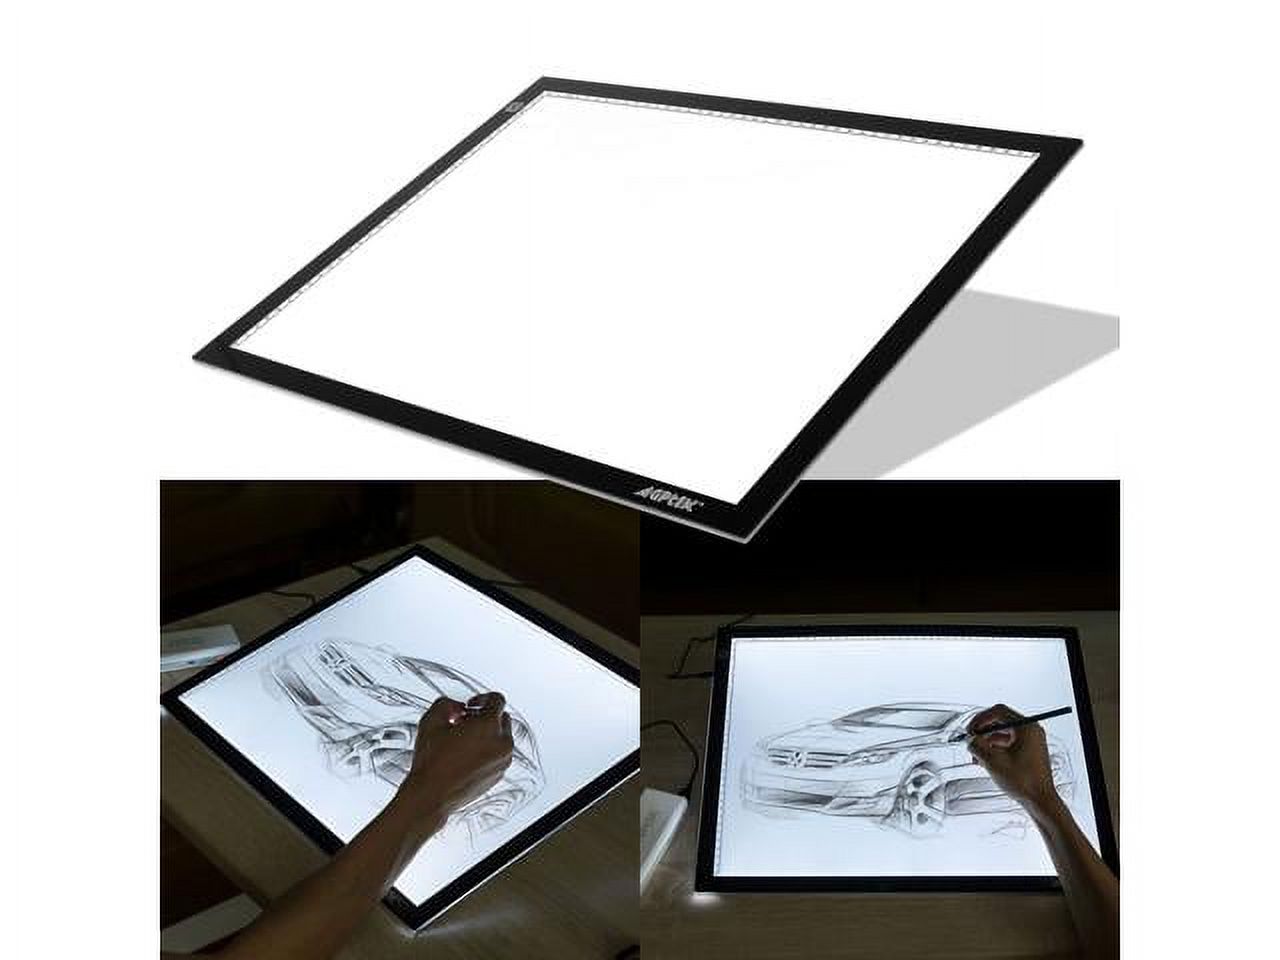 Ultra-thin A3 LED Super Bright Animation Drawing Tracing Board Light Table/Light Box Tattoo Tracing Board - image 4 of 6